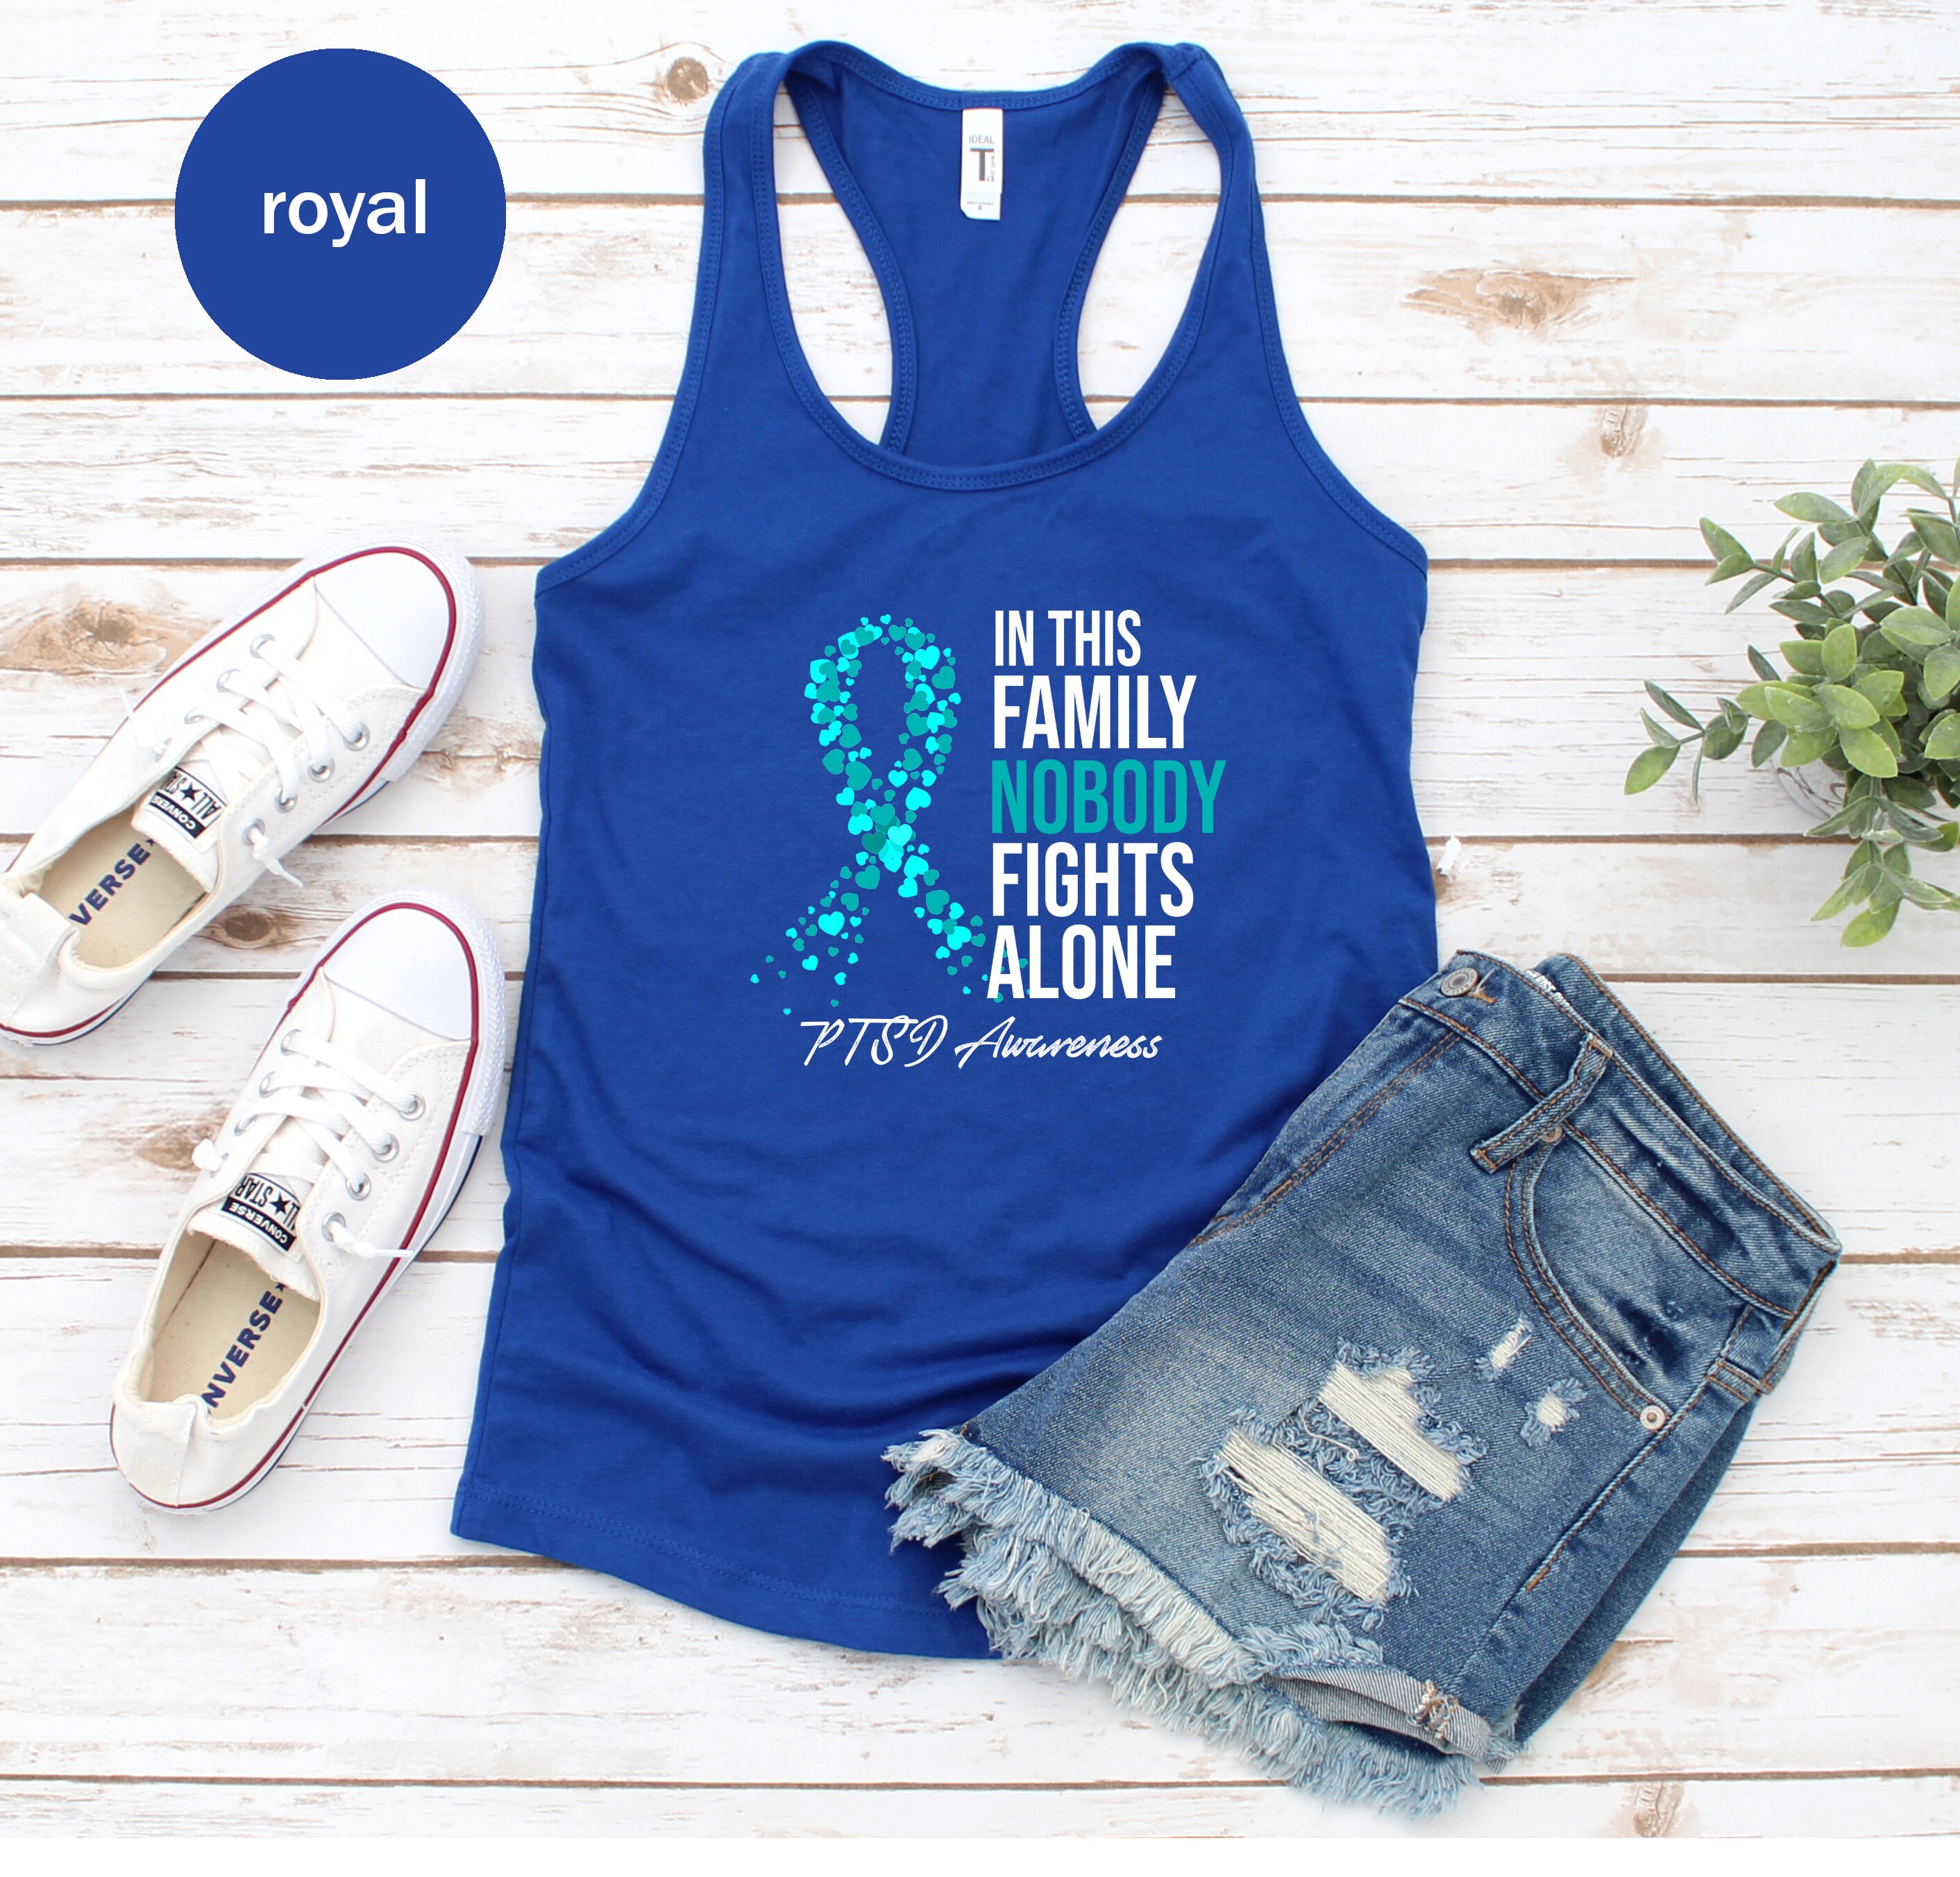 Awareness Month Ribbon Support Squad Gift In This Family Nobody Fights Alone Buy 2+ Get 30% OFF PTSD Awareness Unisex T-shirt